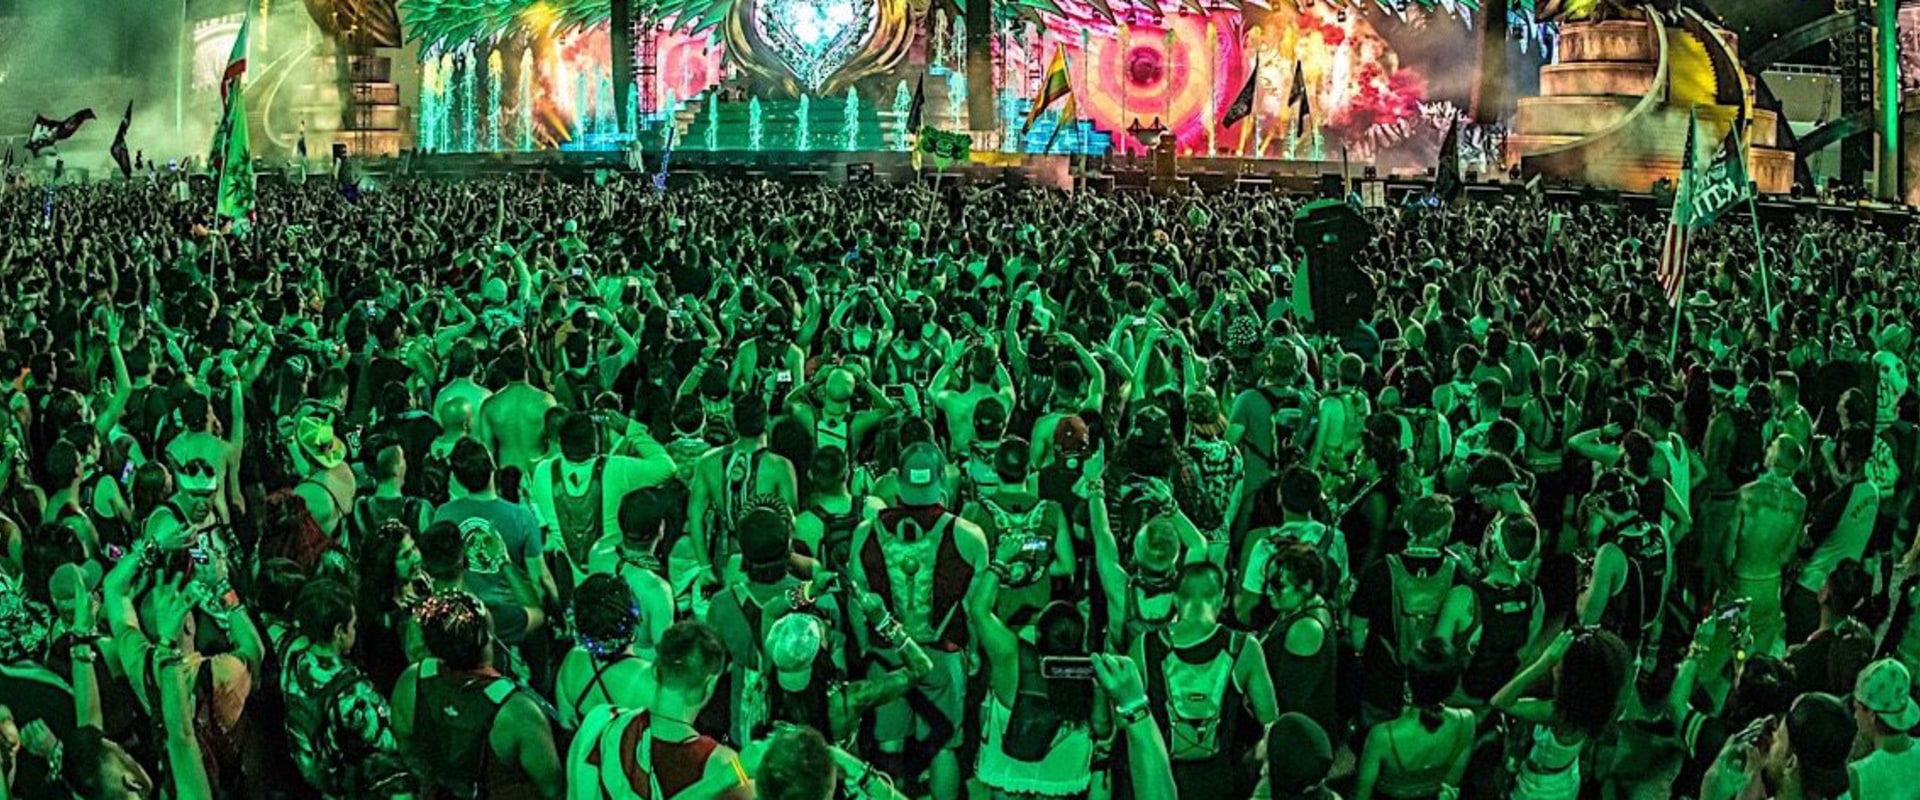 What are some of the best edm festivals in the us?